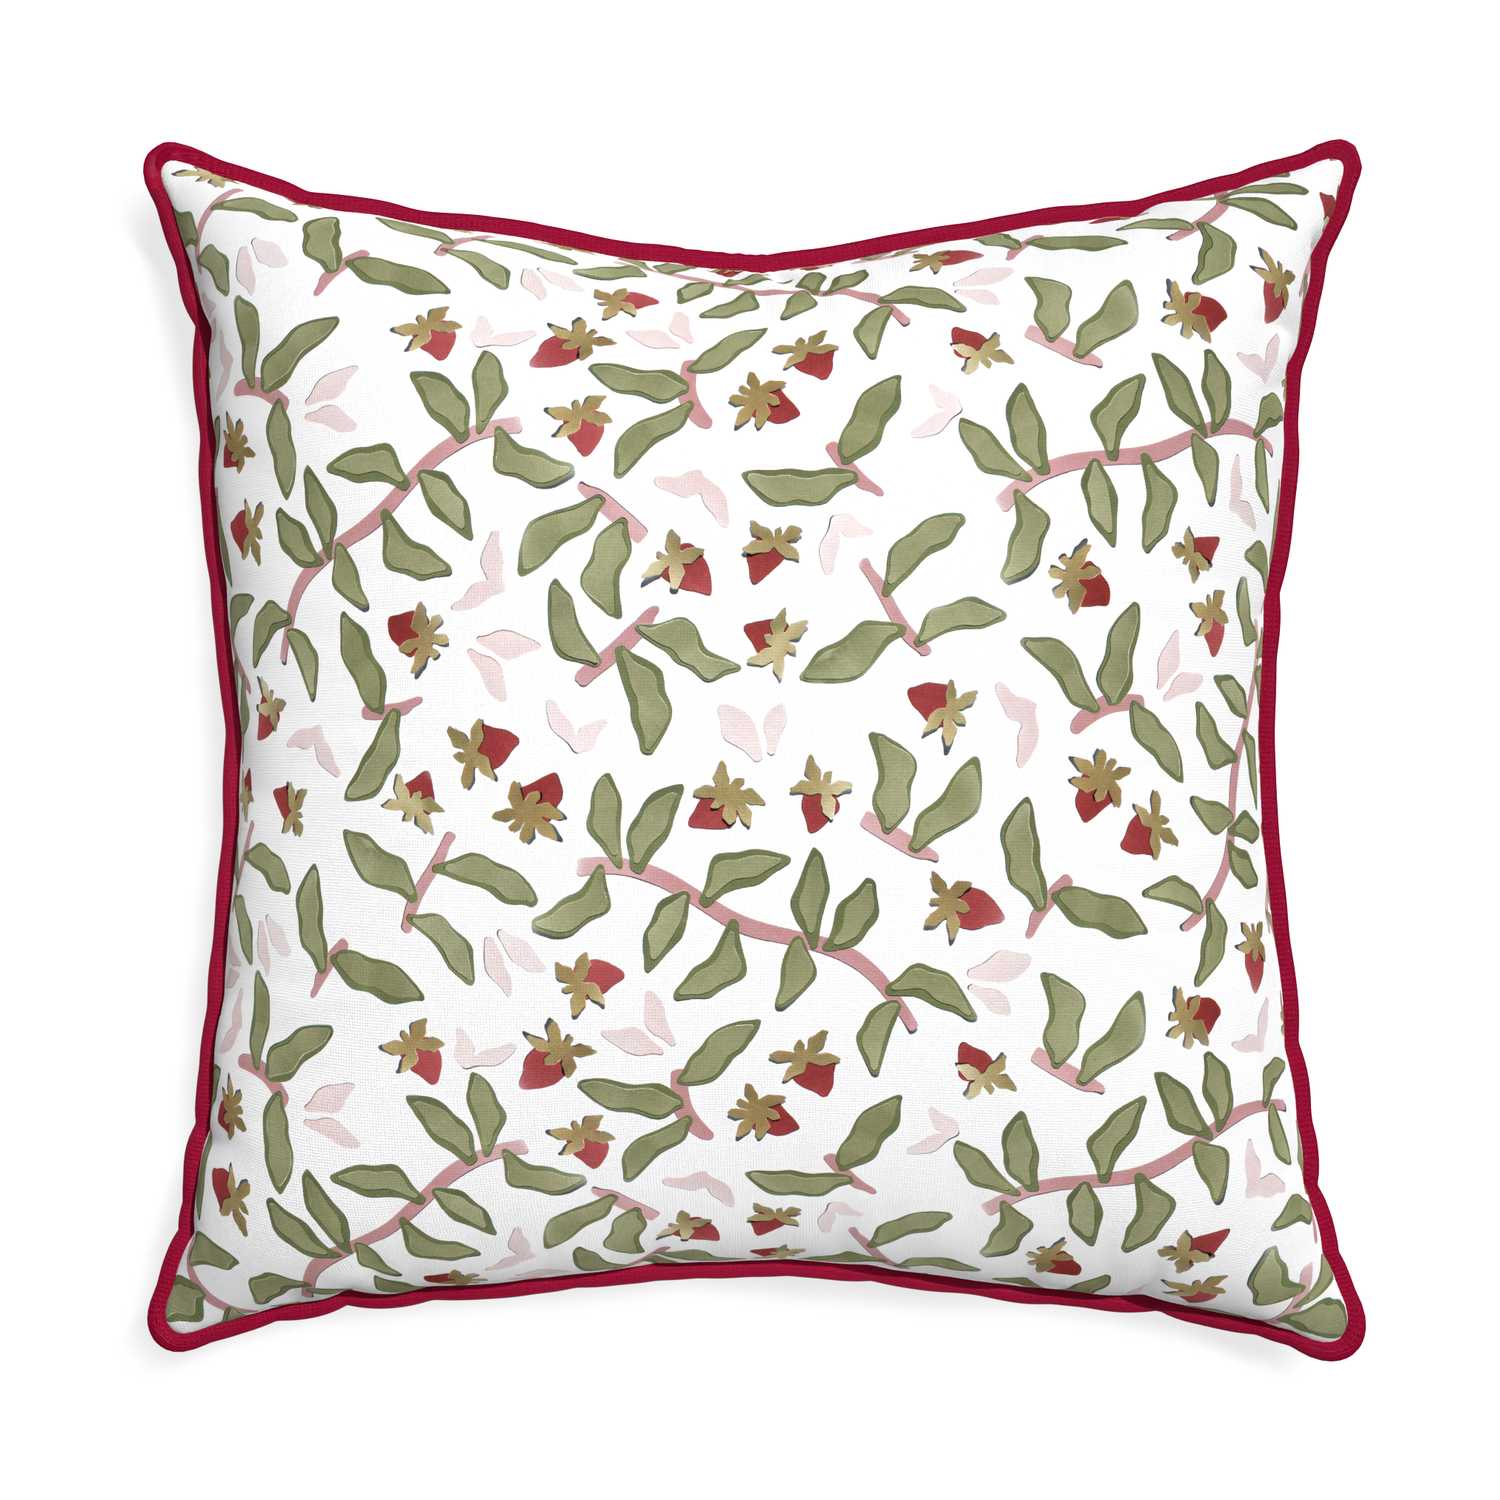 Euro-sham nellie custom pillow with raspberry piping on white background